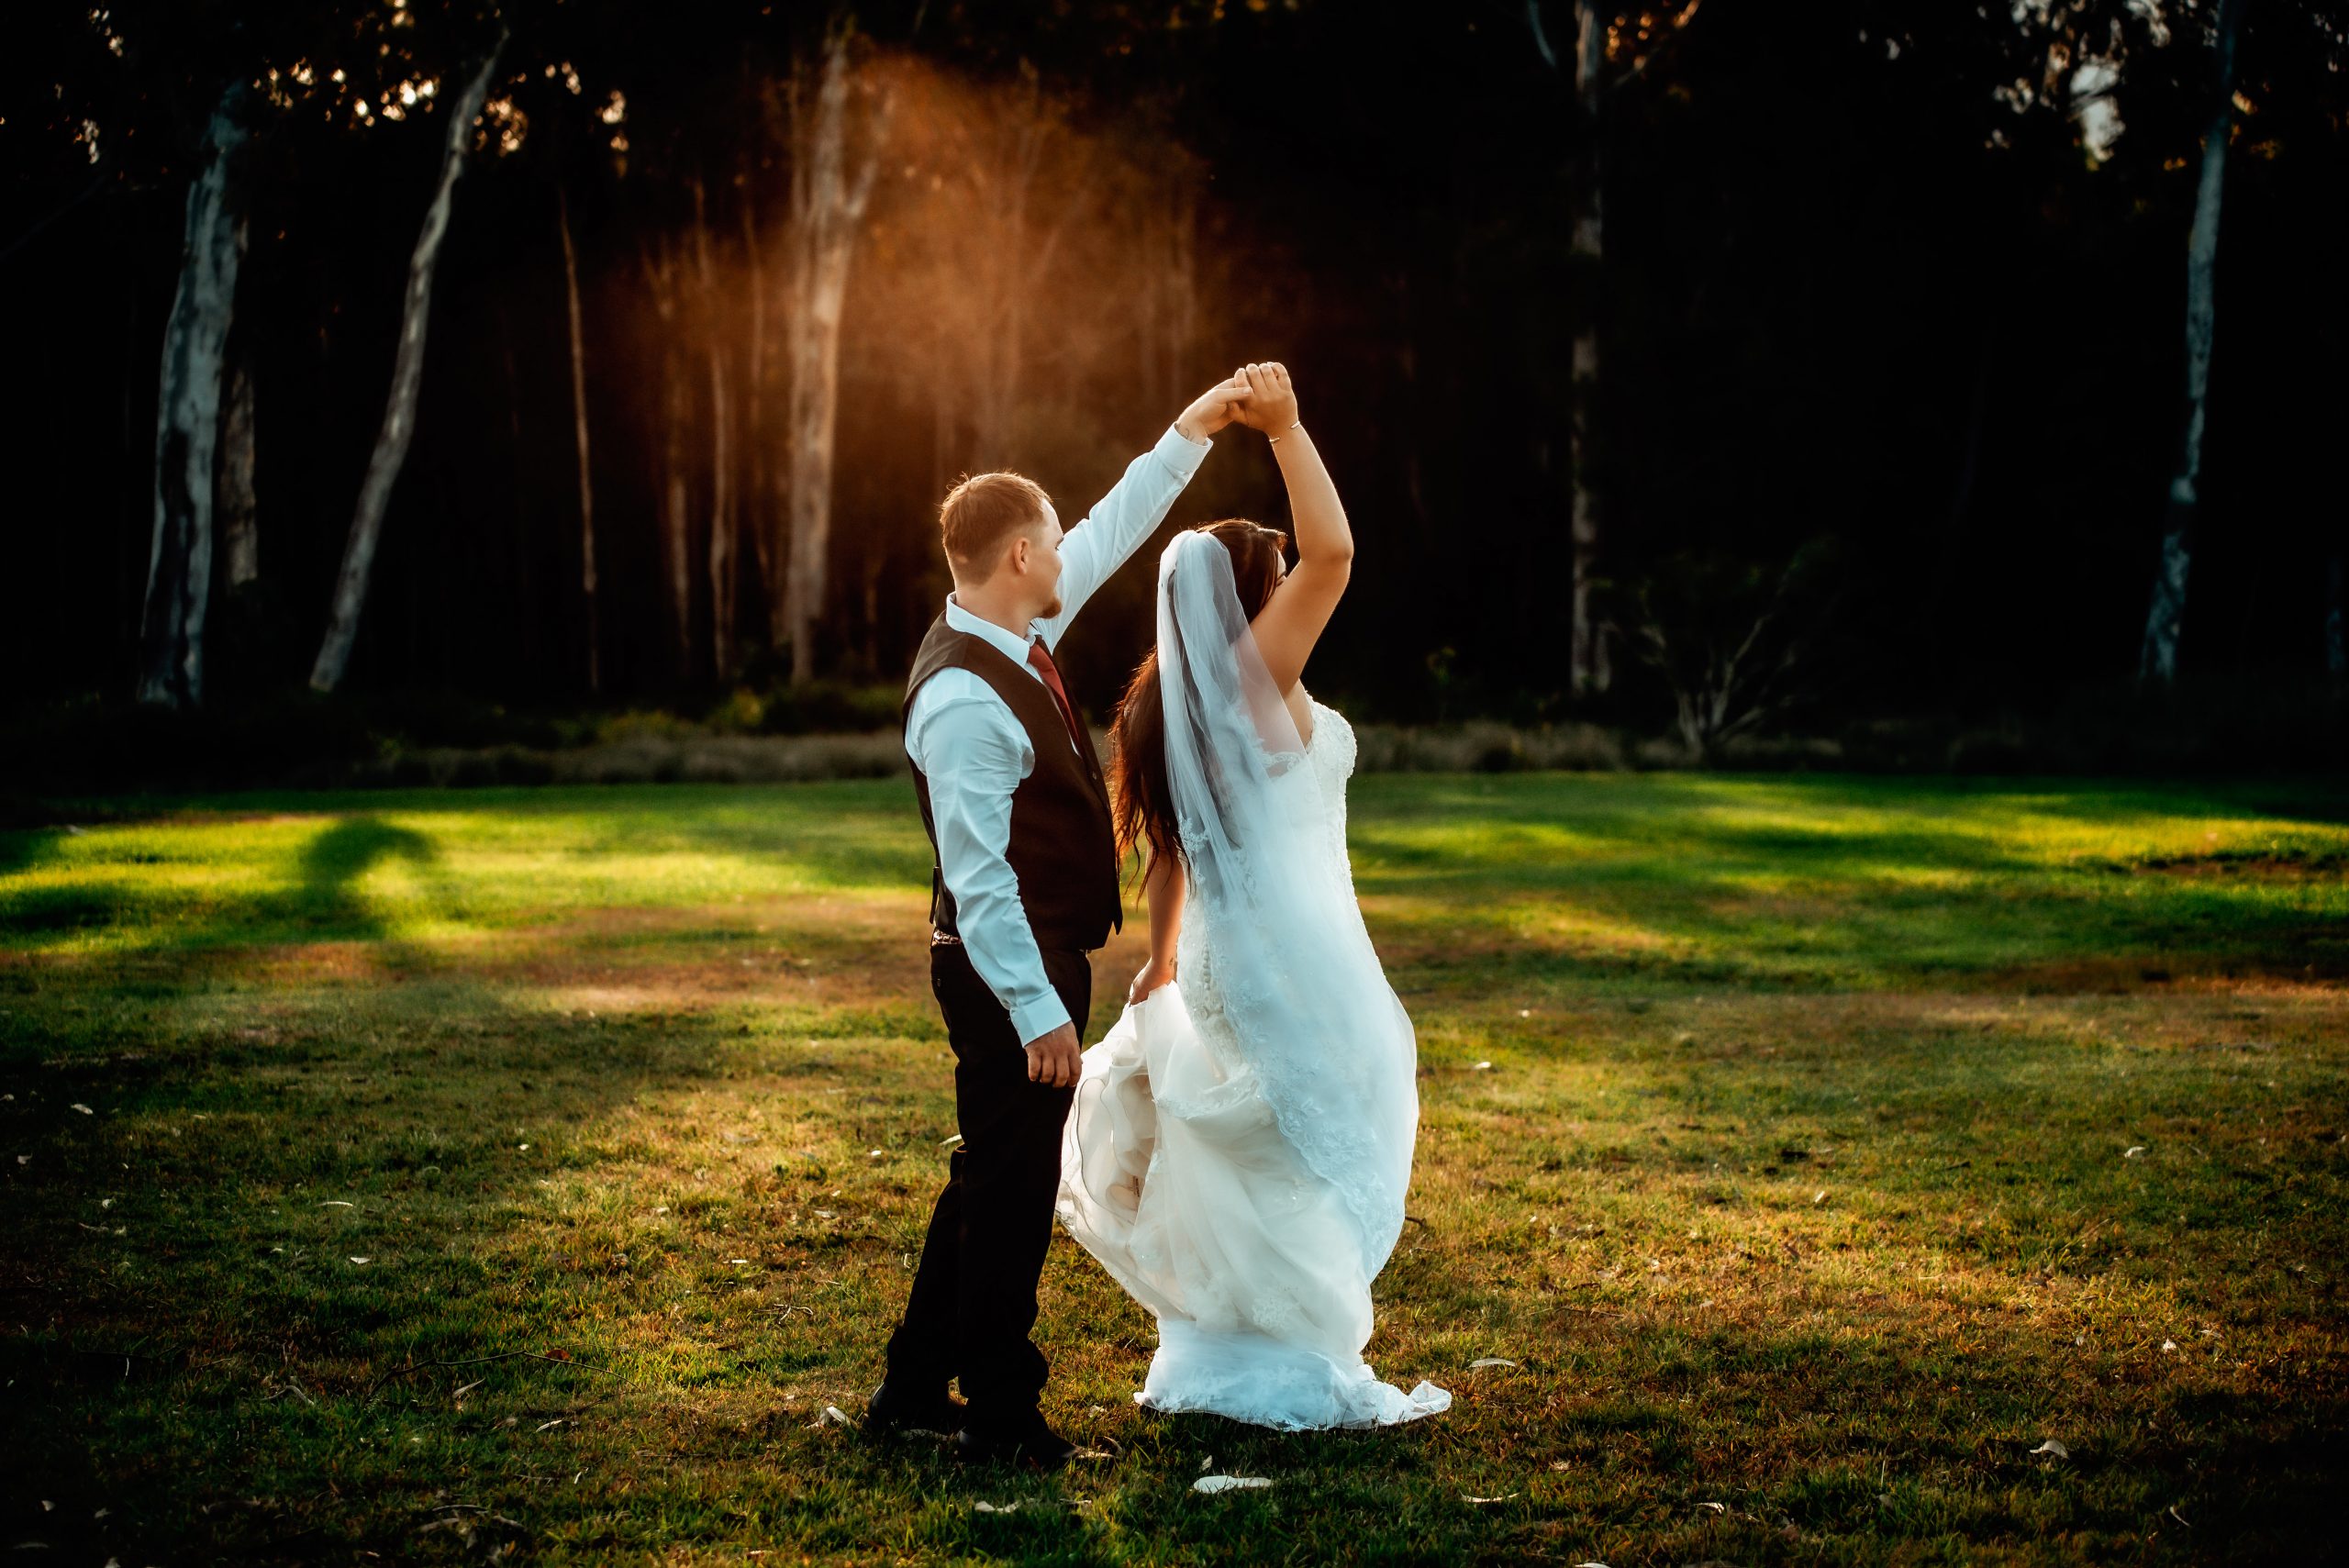 bride and groom dancing in open field at sunset